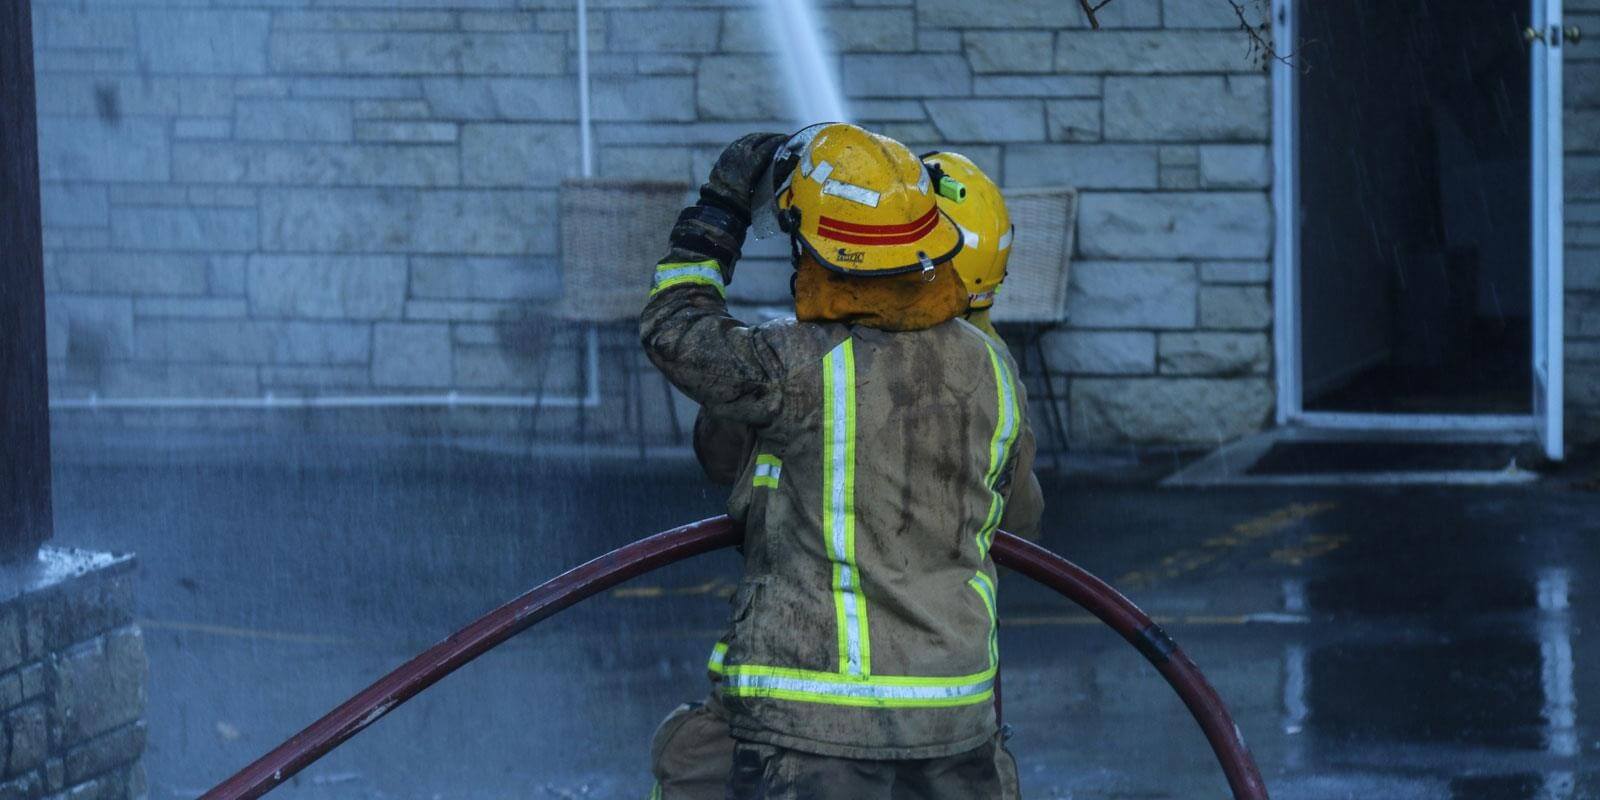 Understanding young people's perceptions of firefighting